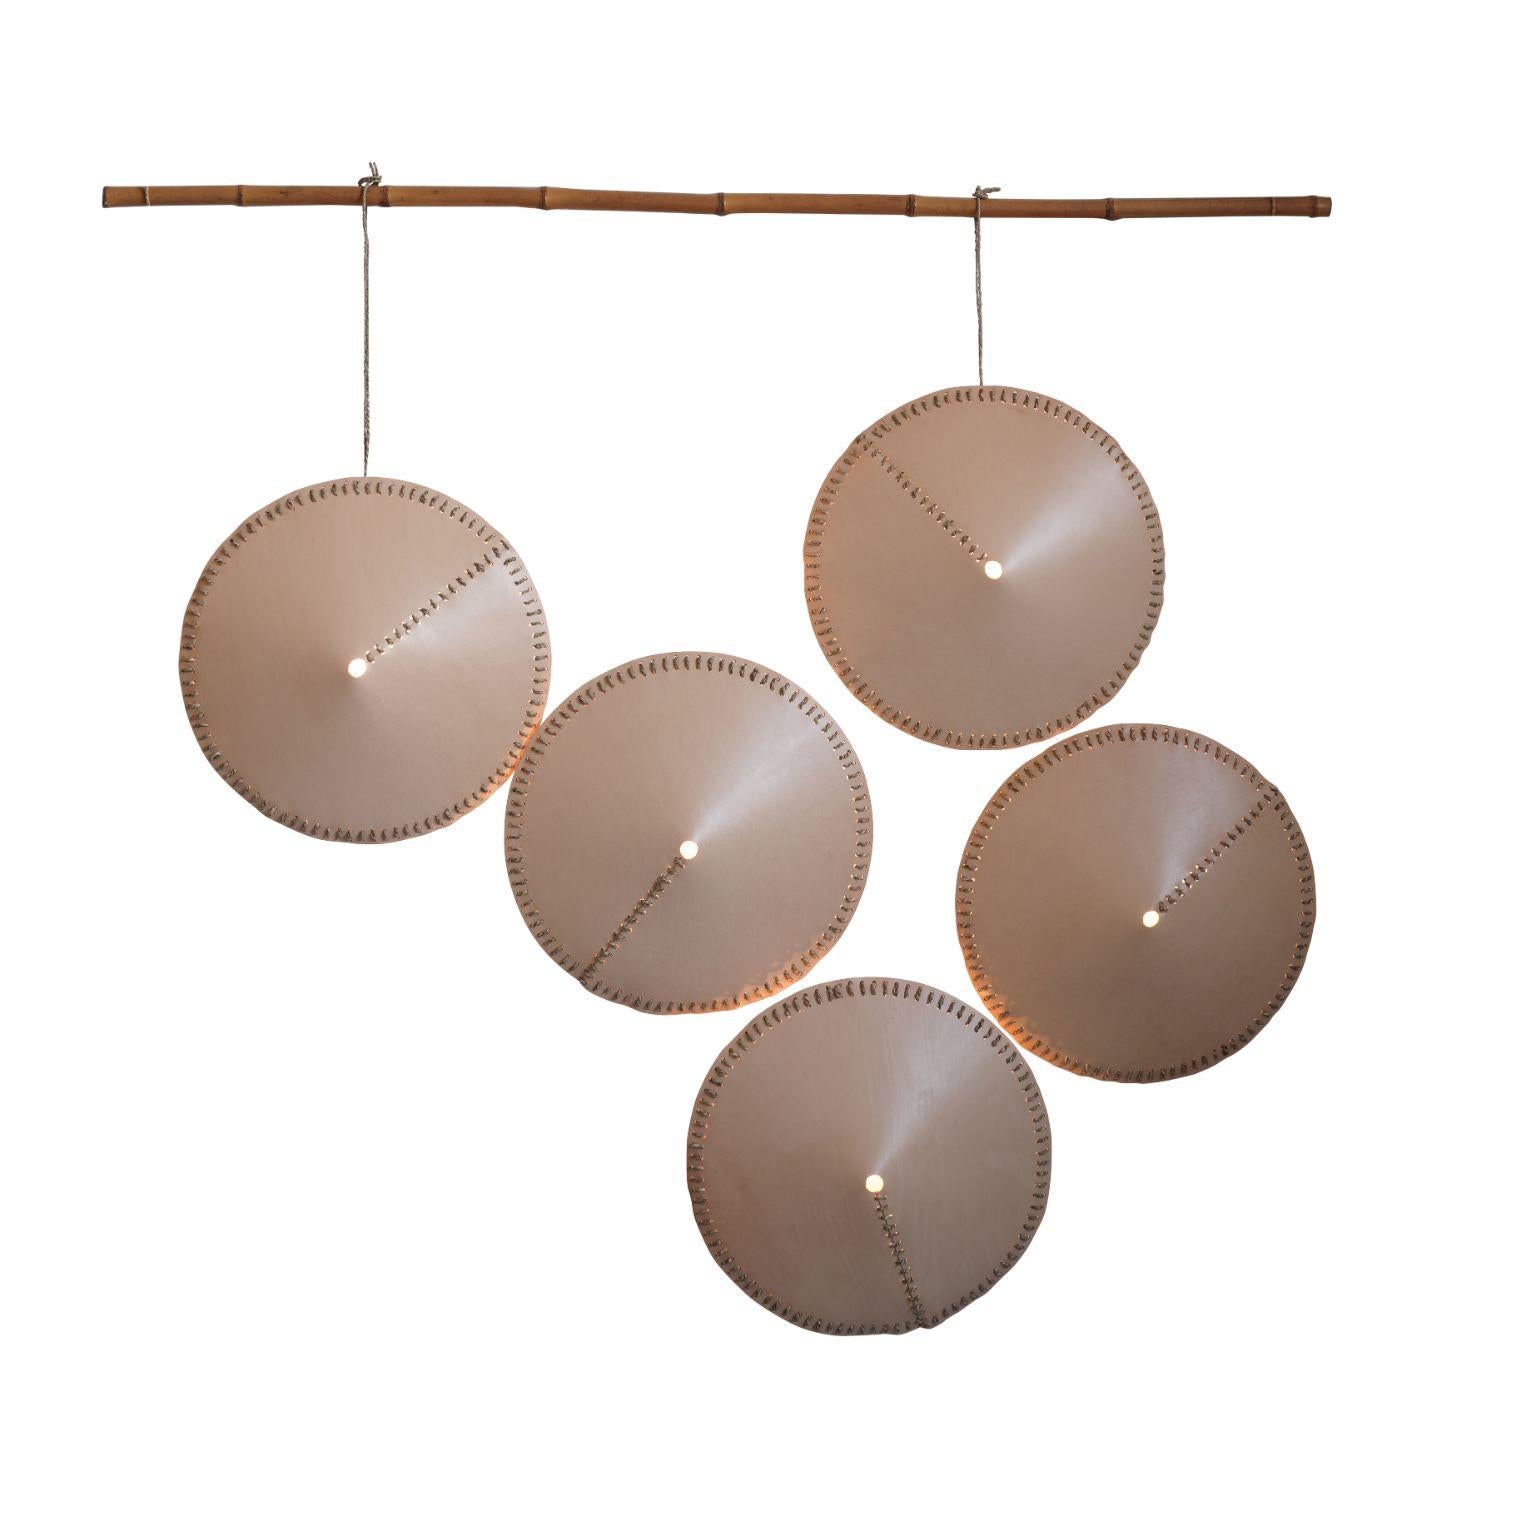 Set of 5 Alp wall lights 335 by Alp Design
Designer: Annick L Petersen.
Dimensions: Ø 42 x H 8 cm (each).
Material: natural tan leather stitched with sea grass cord.

All our lamps can be wired according to each country. If sold to the USA it